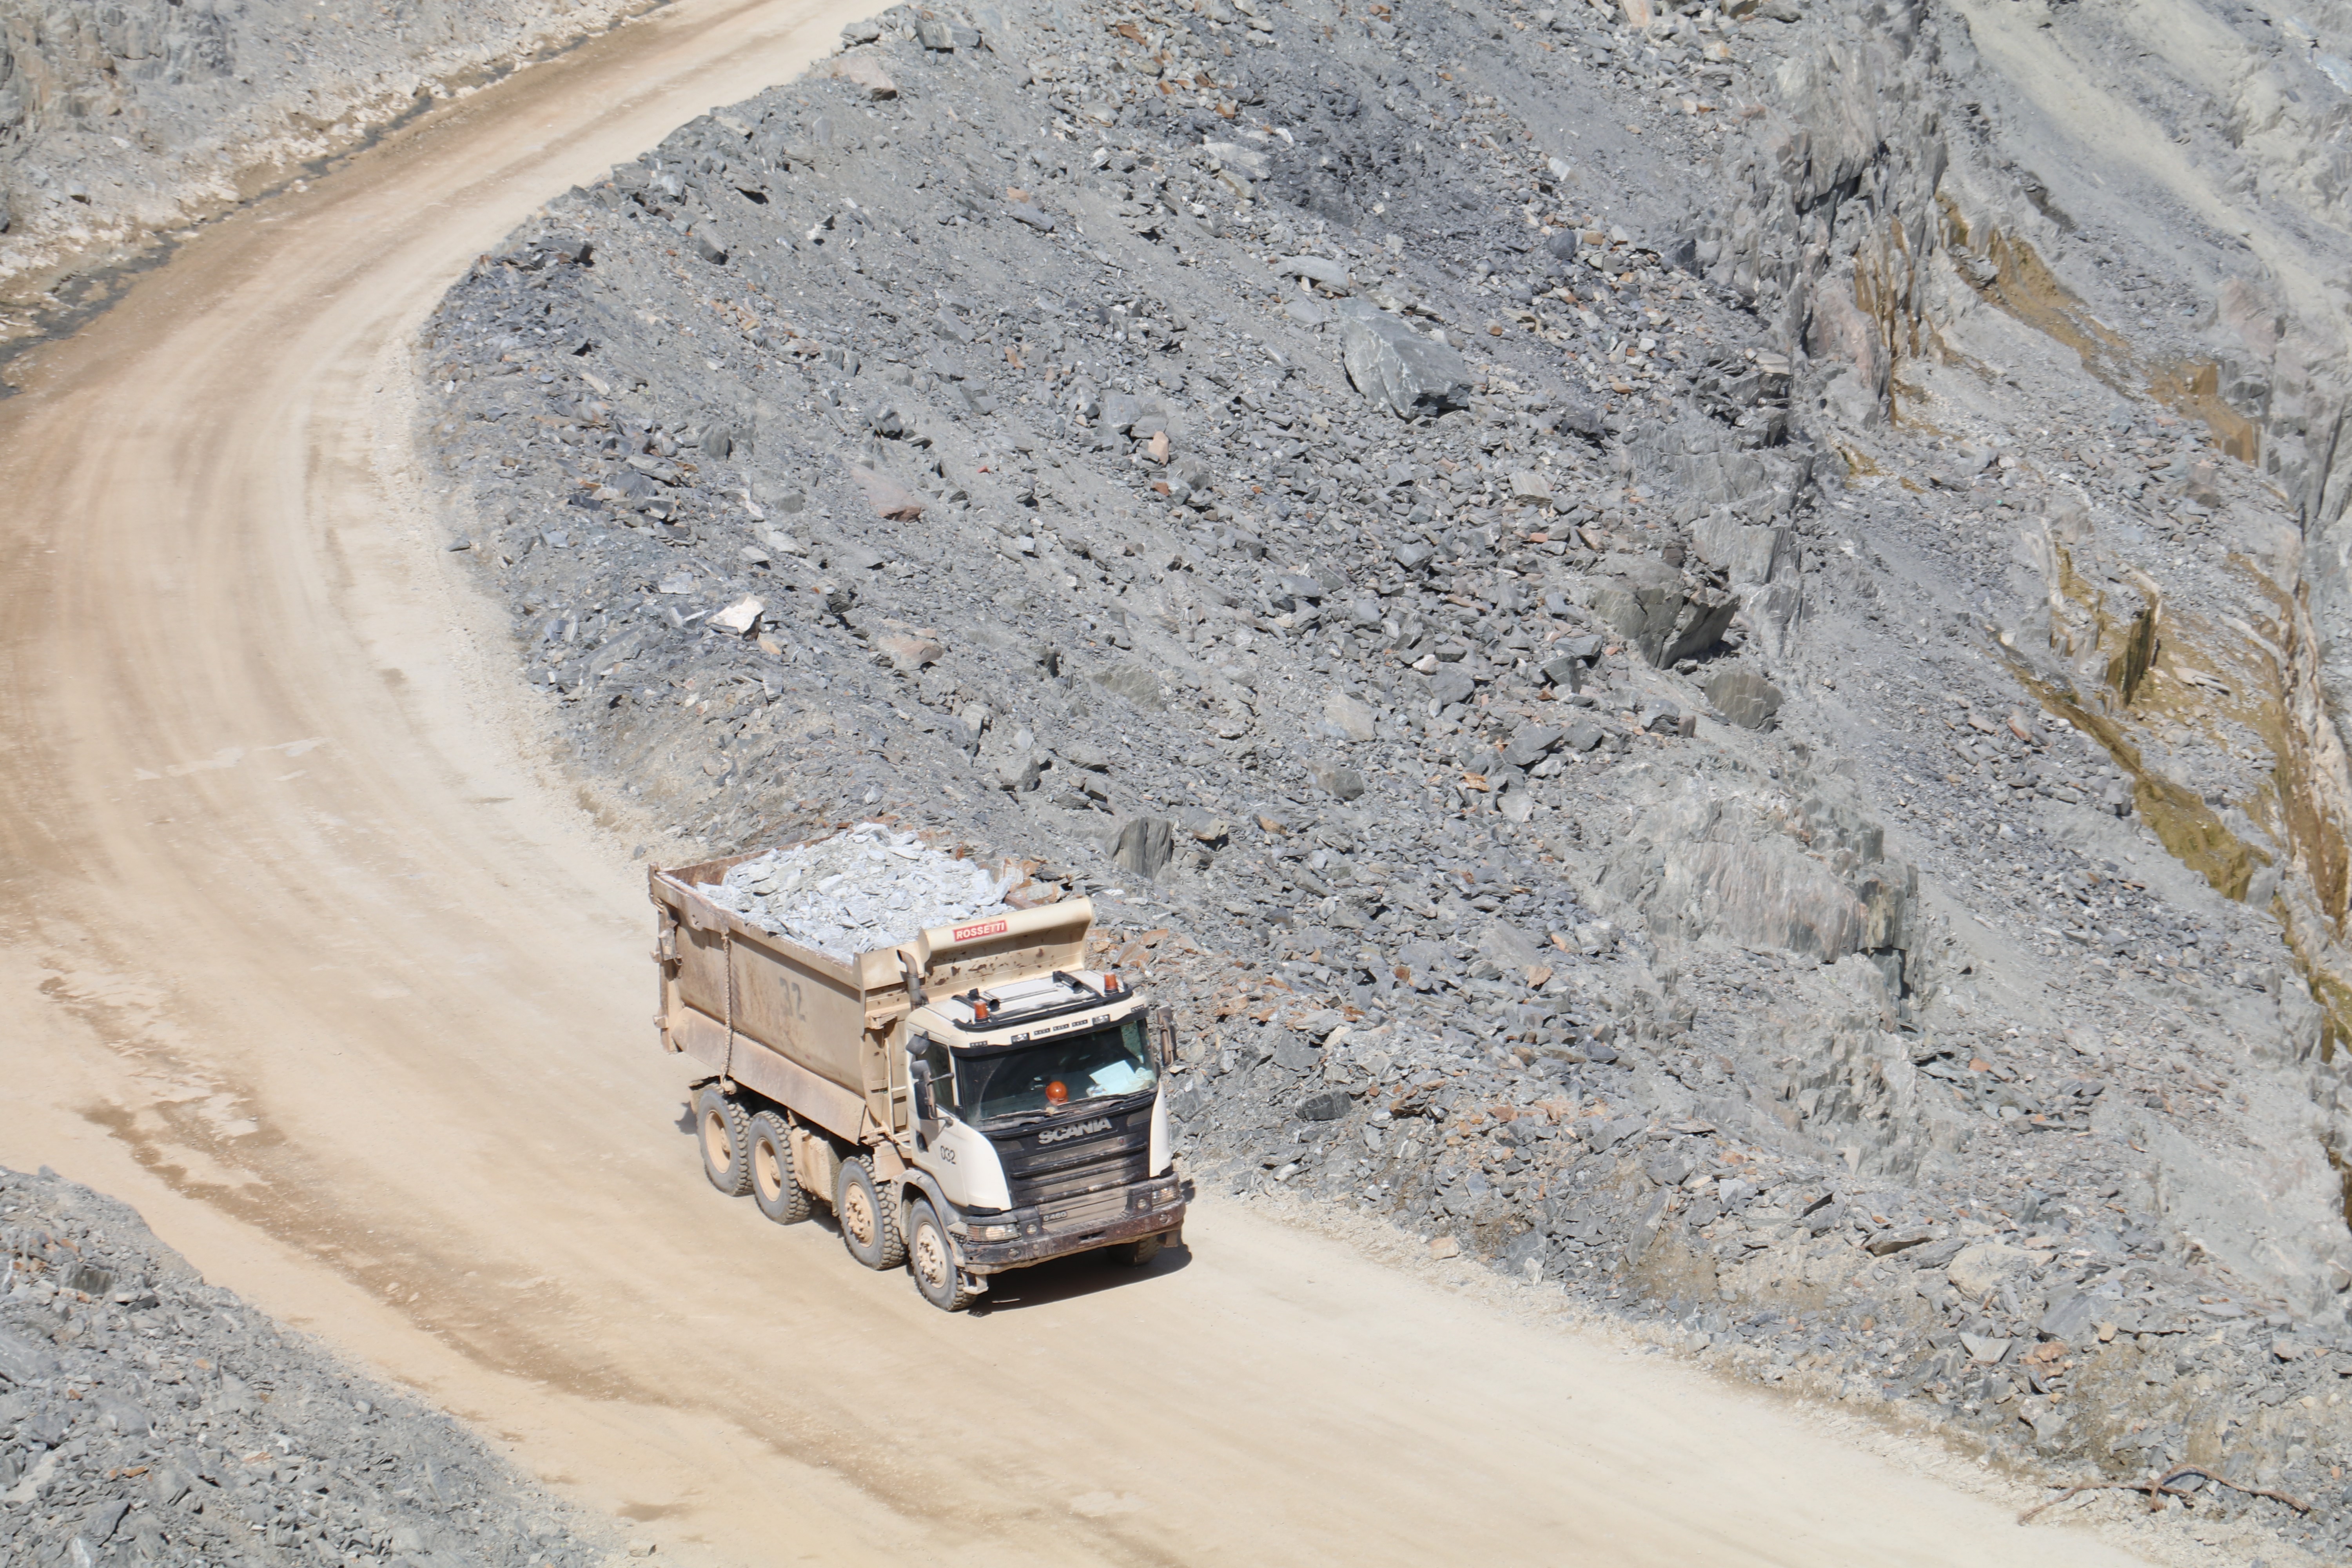 Truck driver in open pit mine monitored by iVOICE fatigue detection system - credit: Wombatt